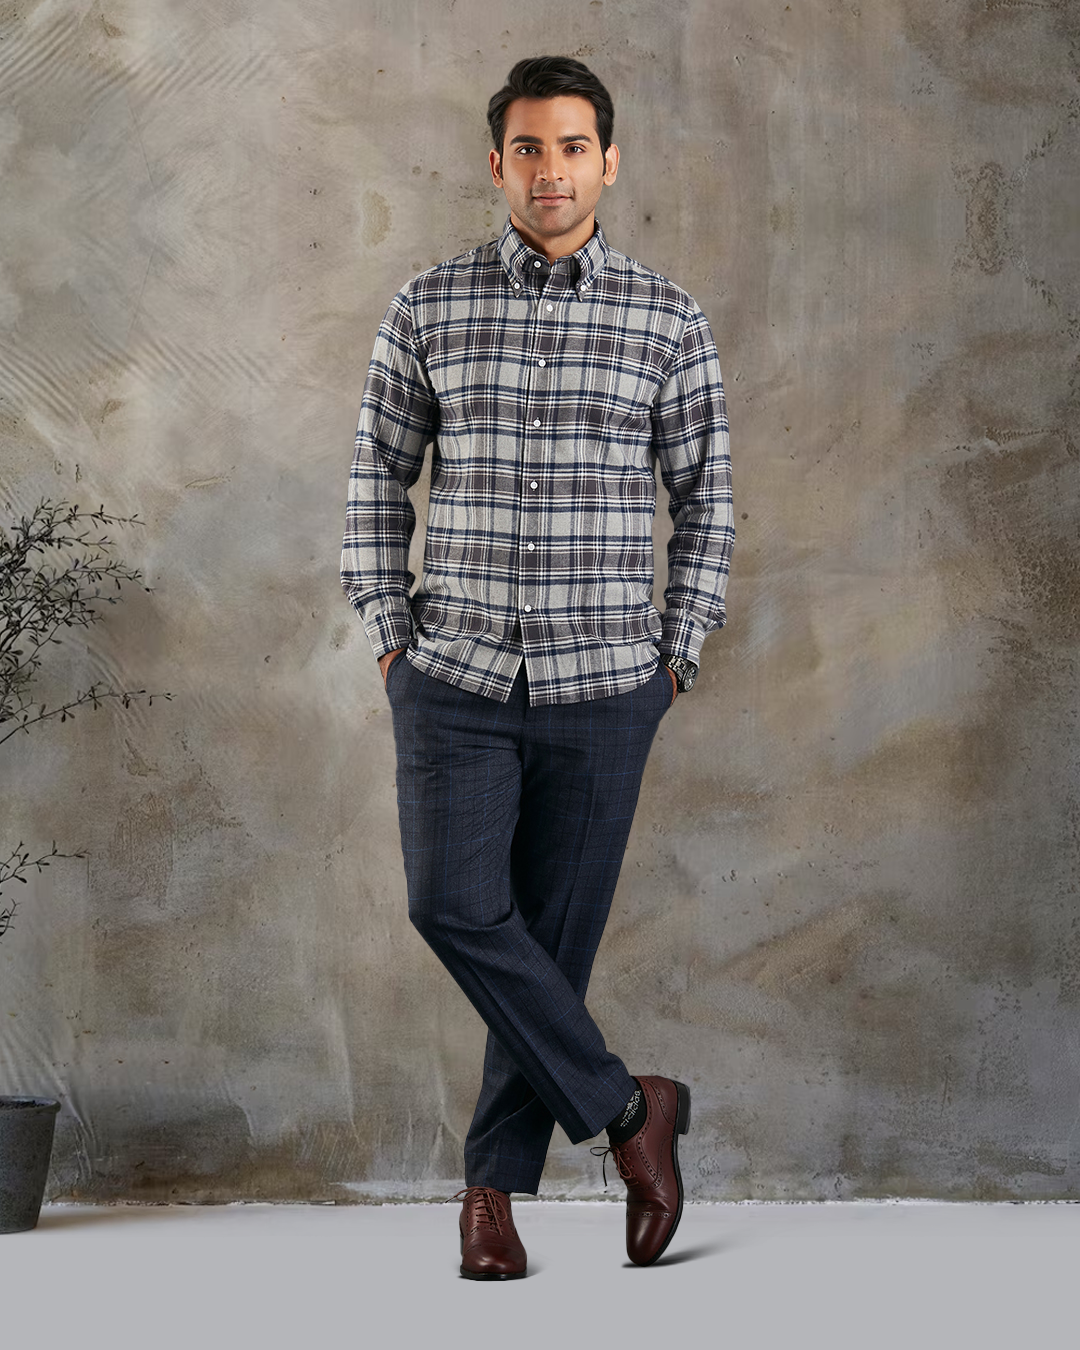 Model wearing custom check shirts for men by Luxire dark grey and navy hands in pockets